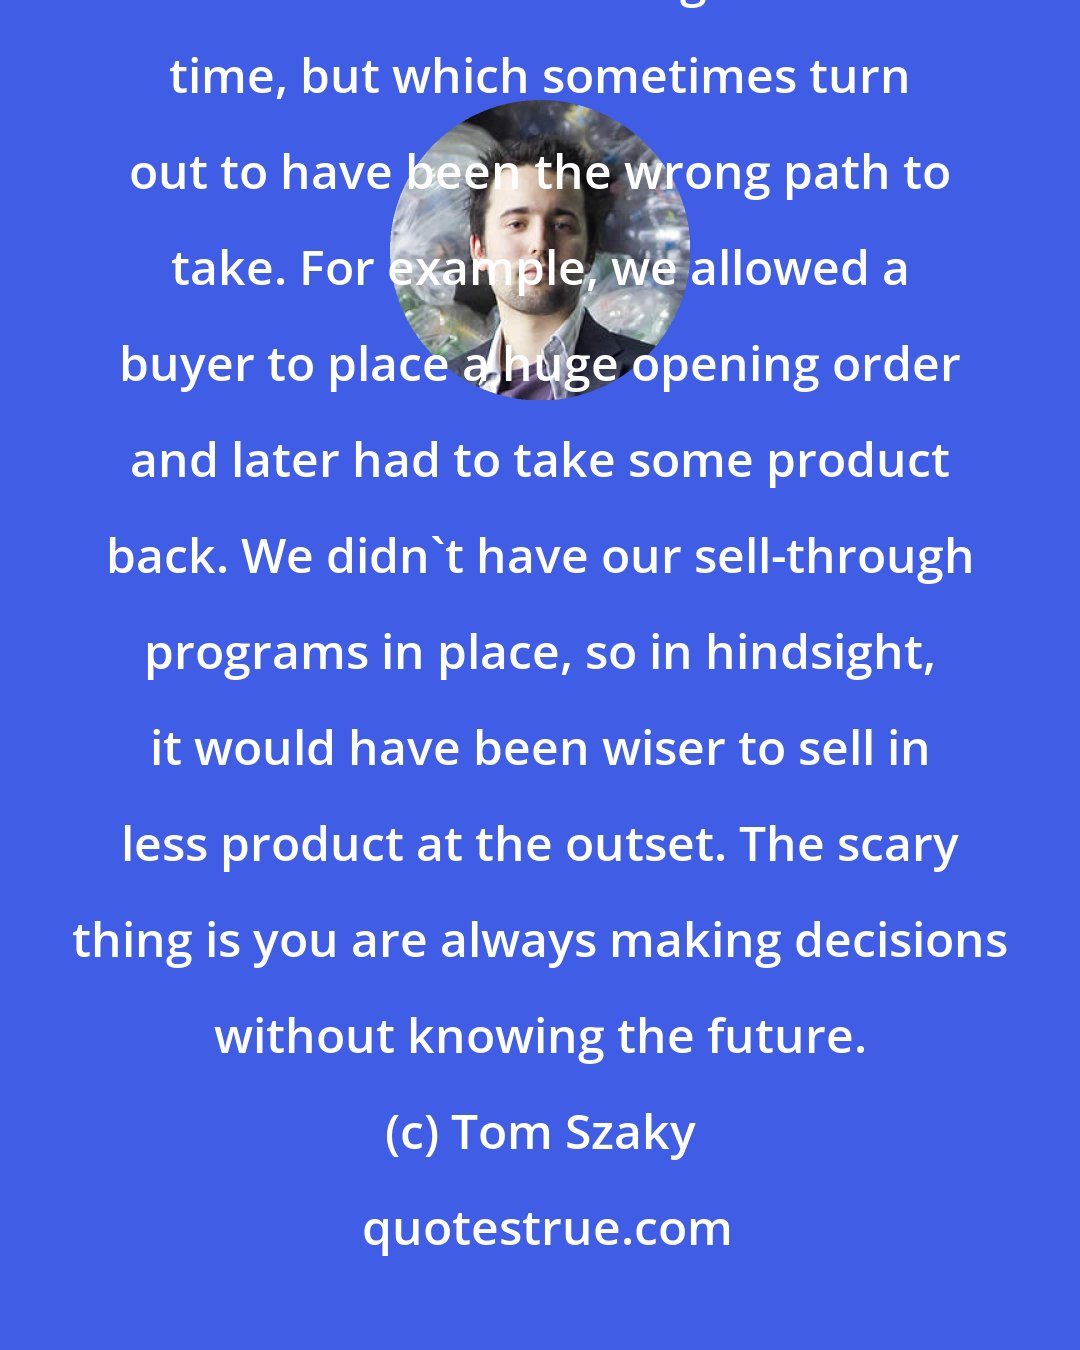 Tom Szaky: Entrepreneurs don't really make mistakes, though. We just make decisions that seem right at the time, but which sometimes turn out to have been the wrong path to take. For example, we allowed a buyer to place a huge opening order and later had to take some product back. We didn't have our sell-through programs in place, so in hindsight, it would have been wiser to sell in less product at the outset. The scary thing is you are always making decisions without knowing the future.